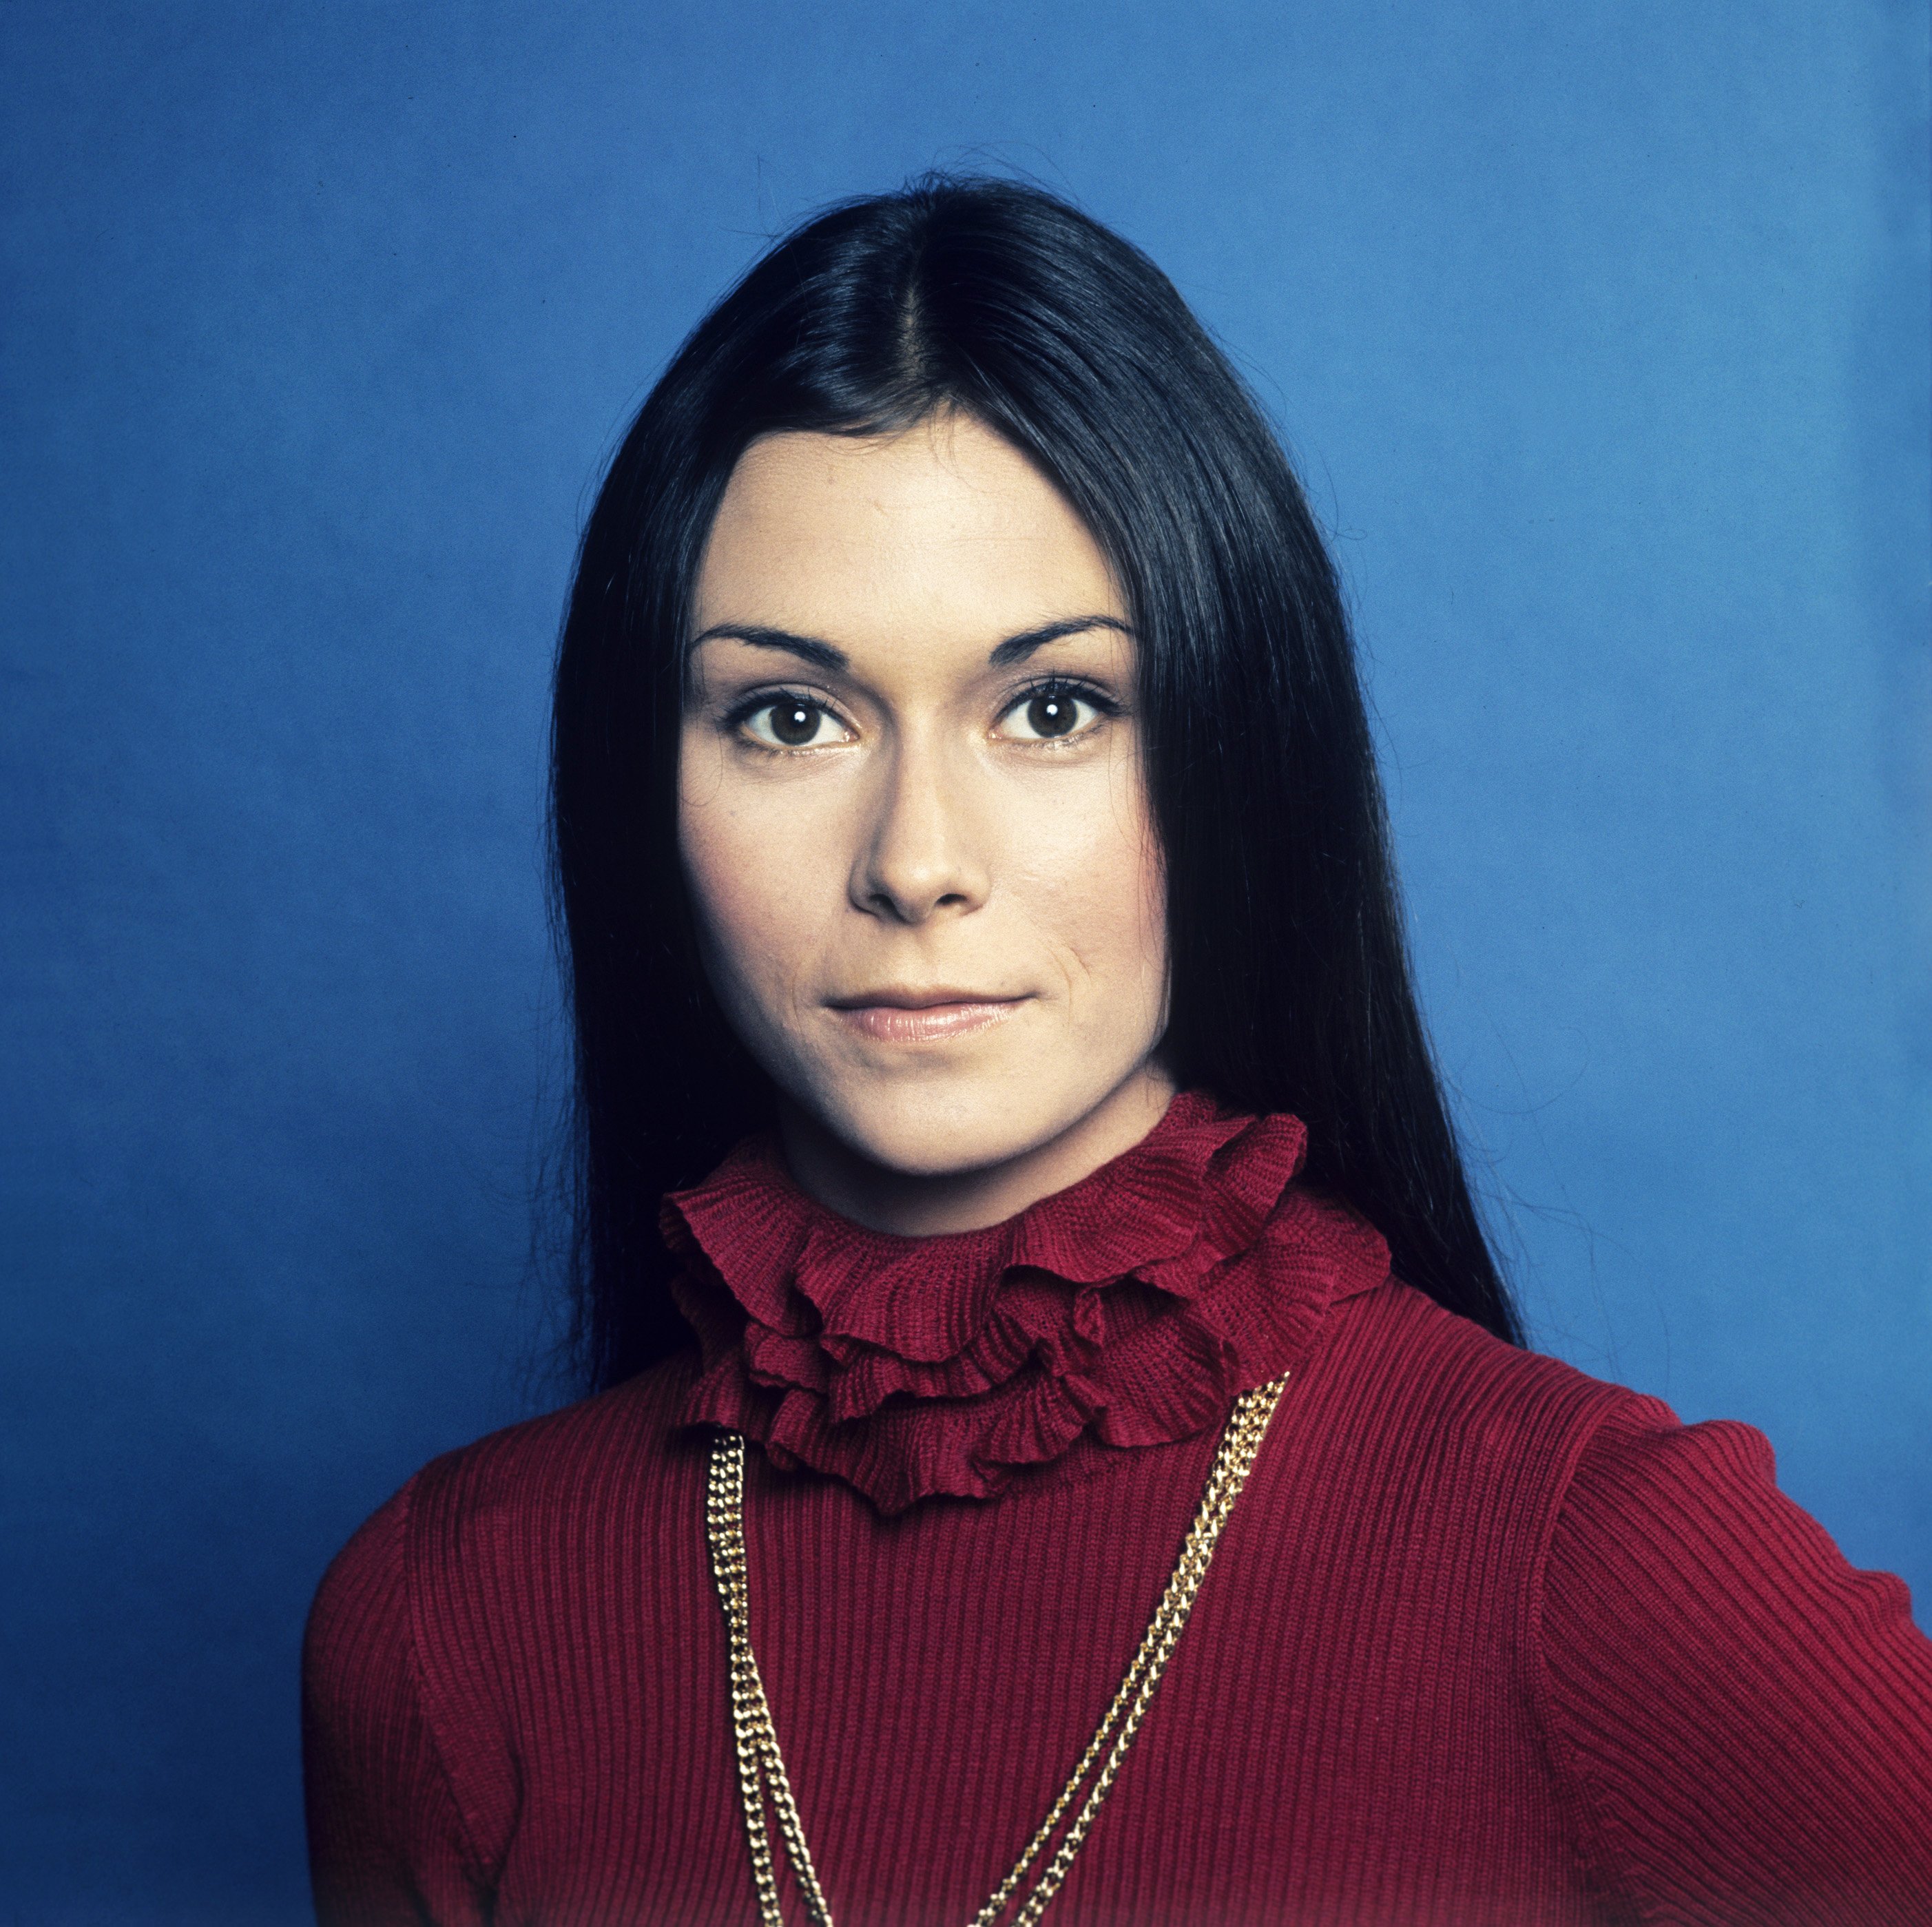 Kate Jackson posing for a portrait while starring in "The Rookies" | Source: Getty Images